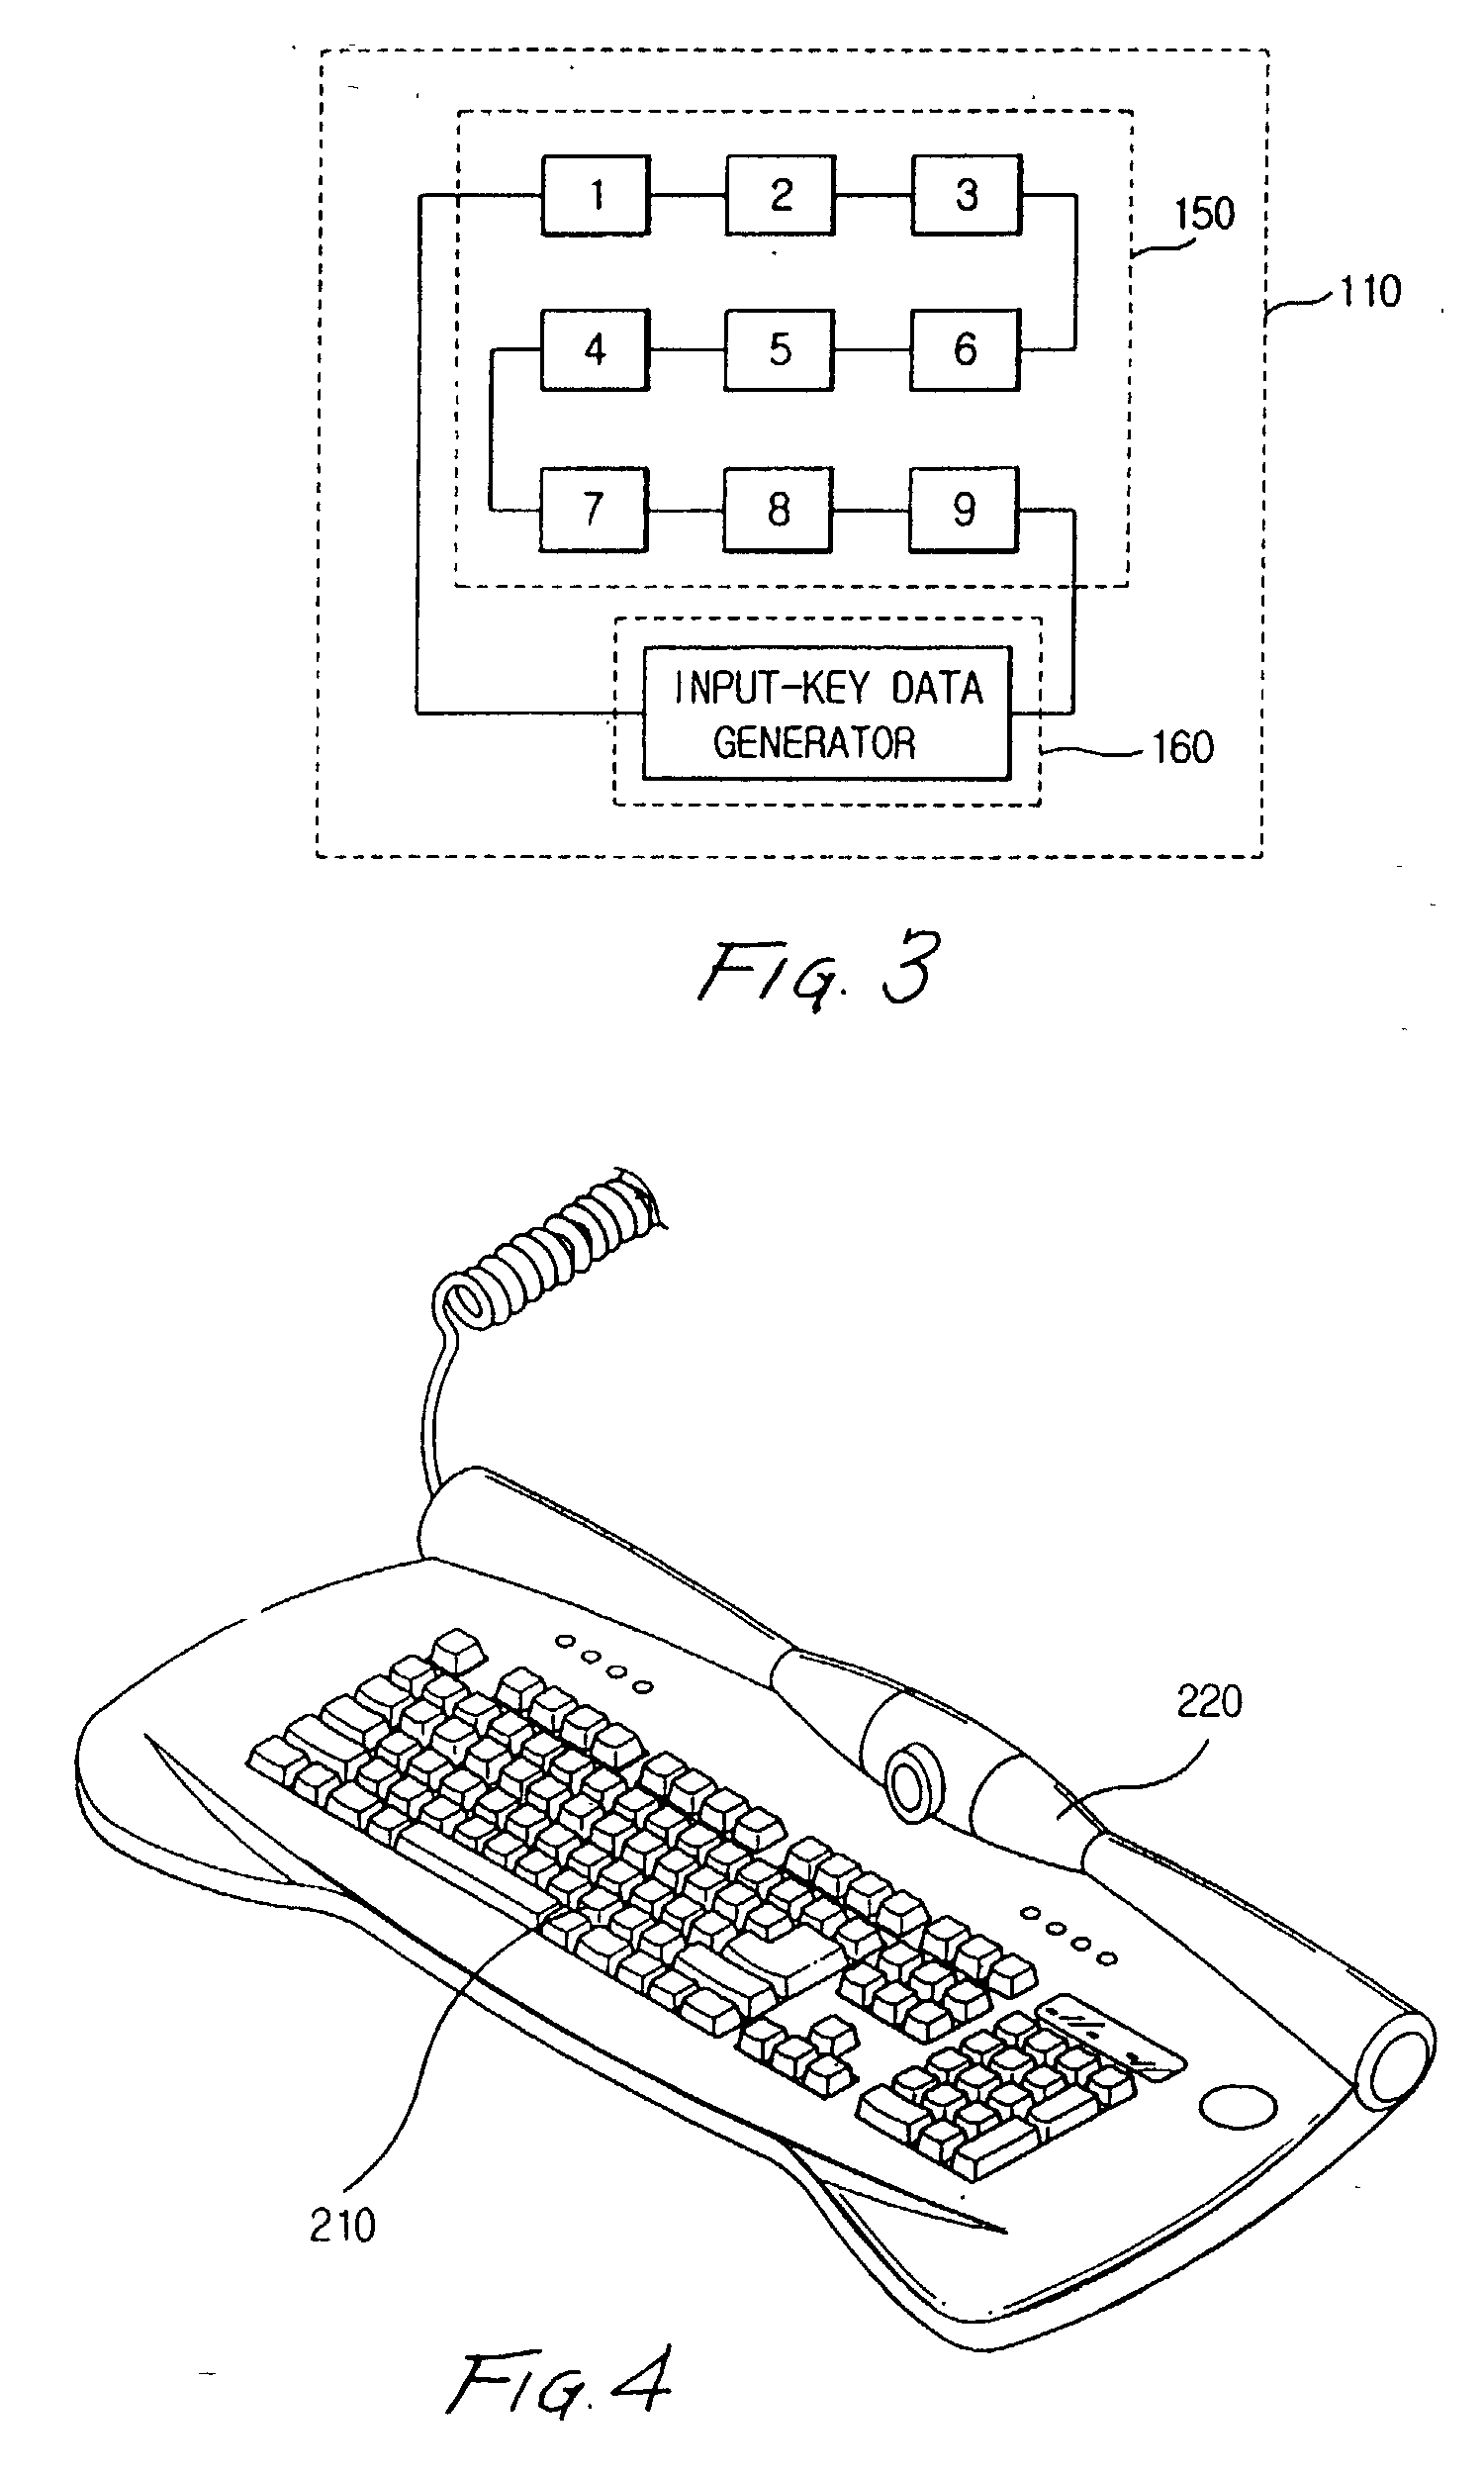 Wired keyboard with built-in web camera